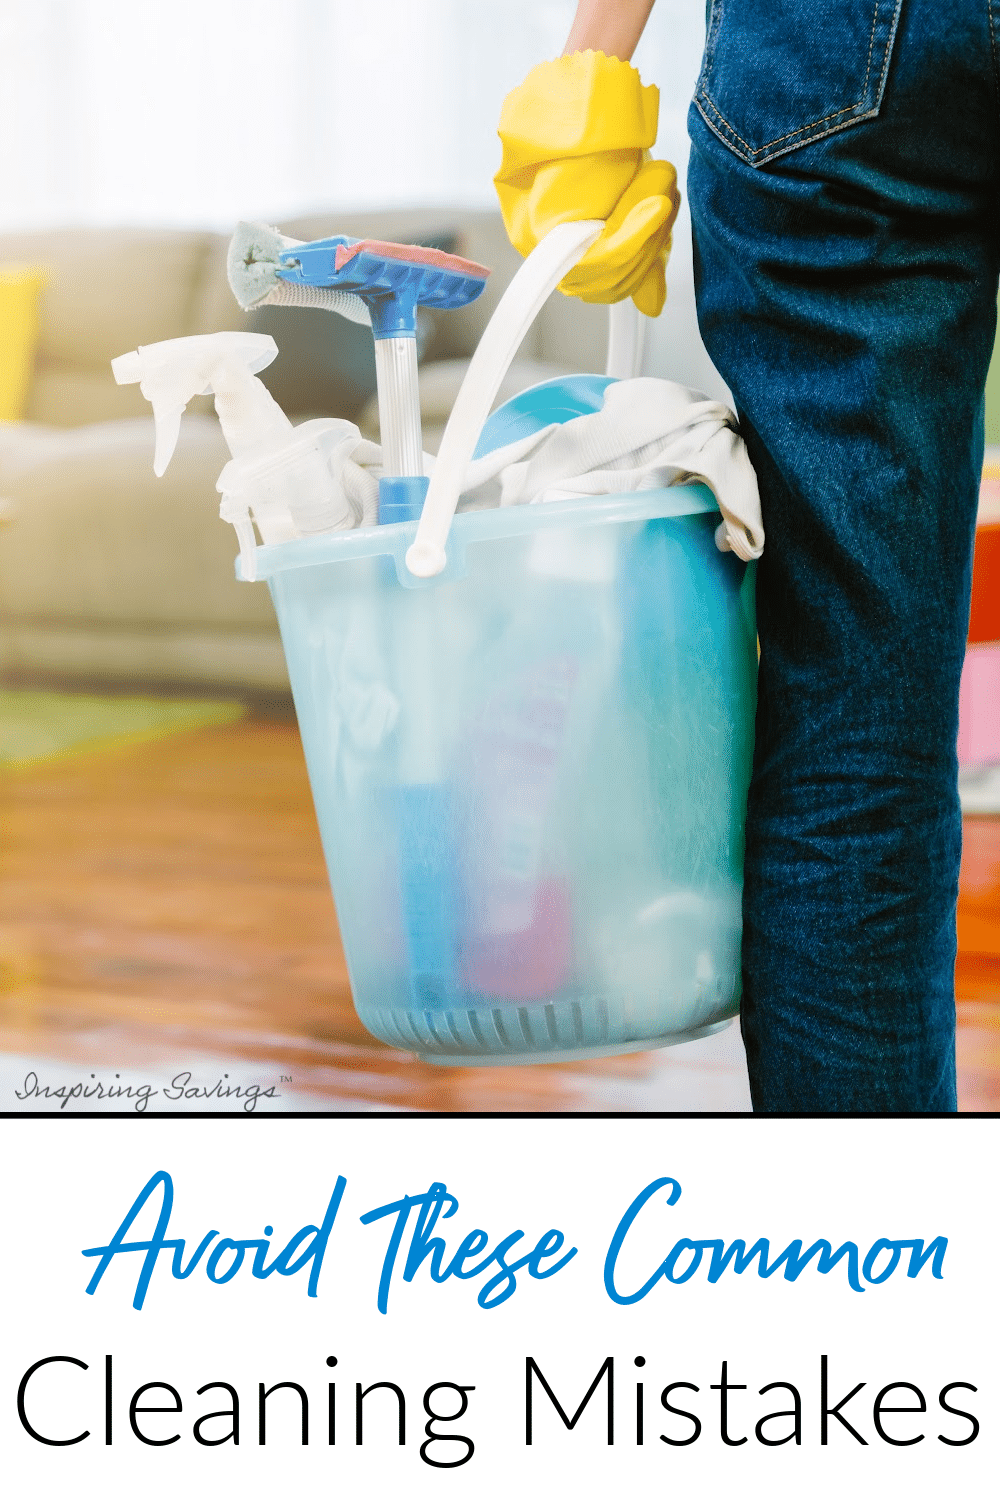 4 common household mistakes you're making while cleaning